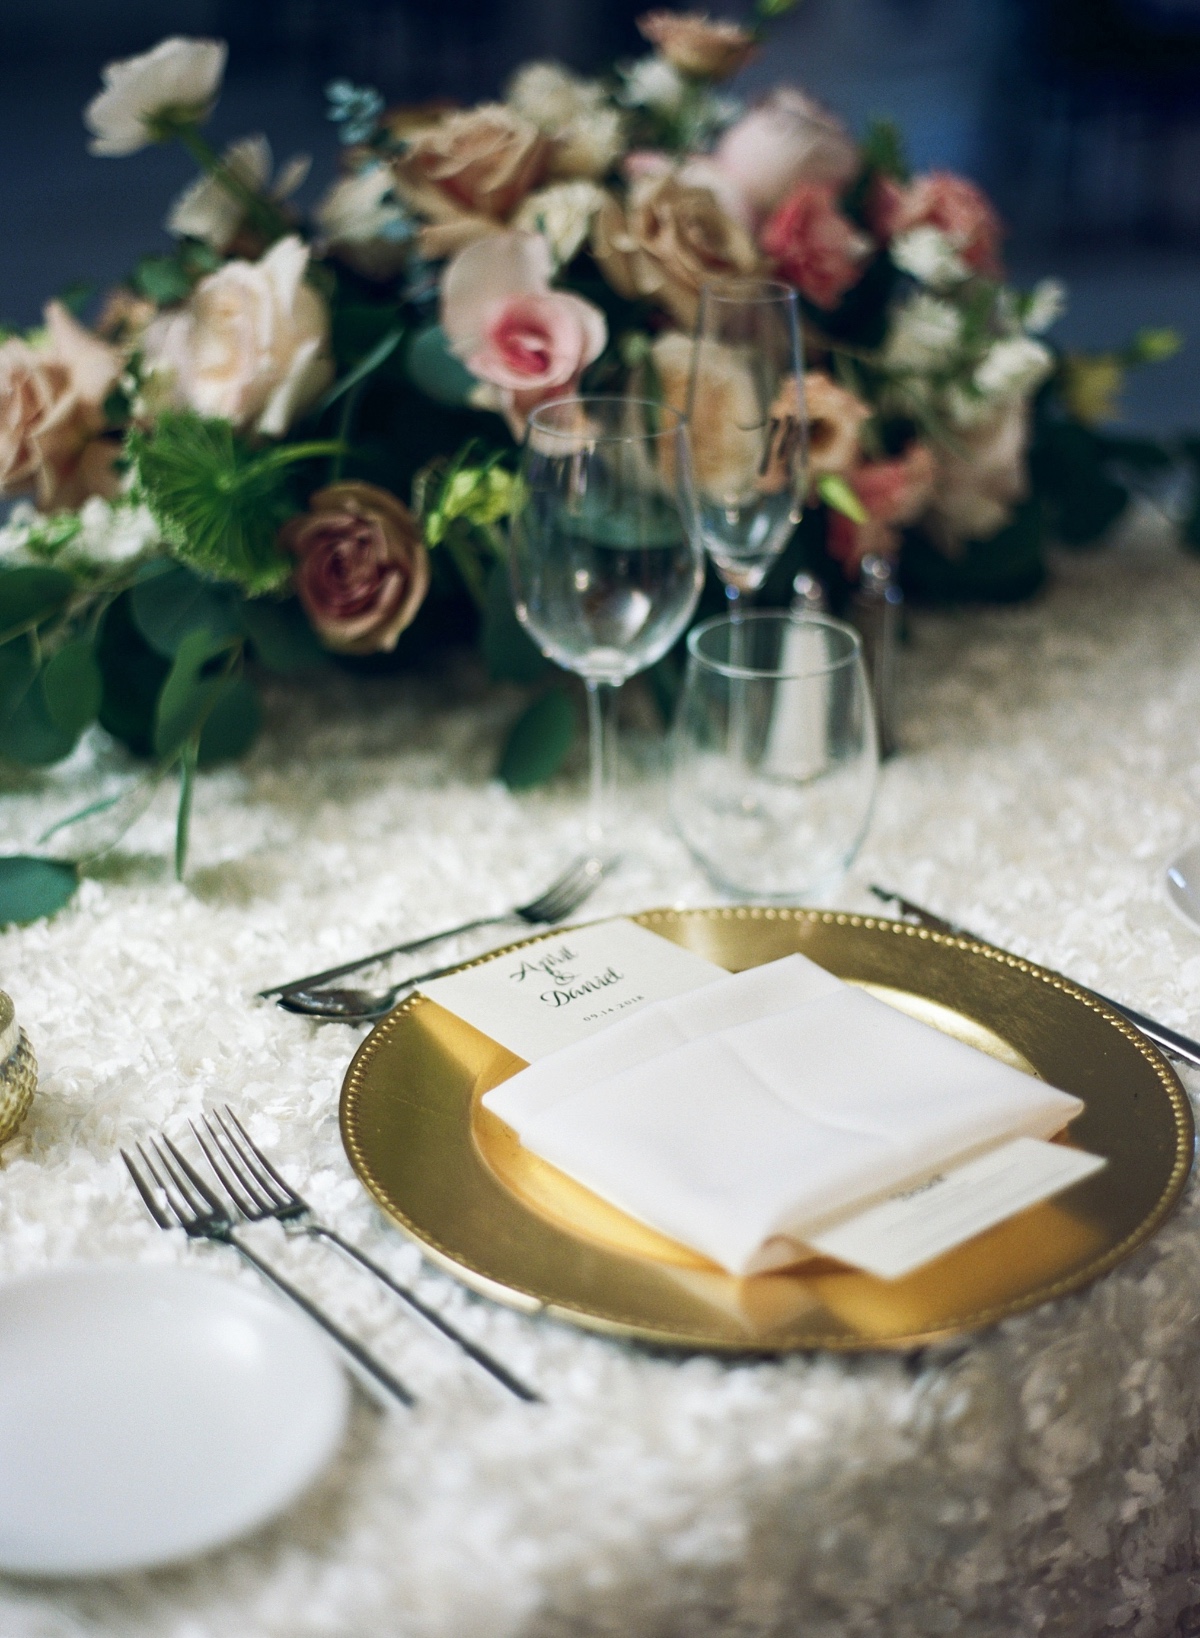 gold and white wedding place setting